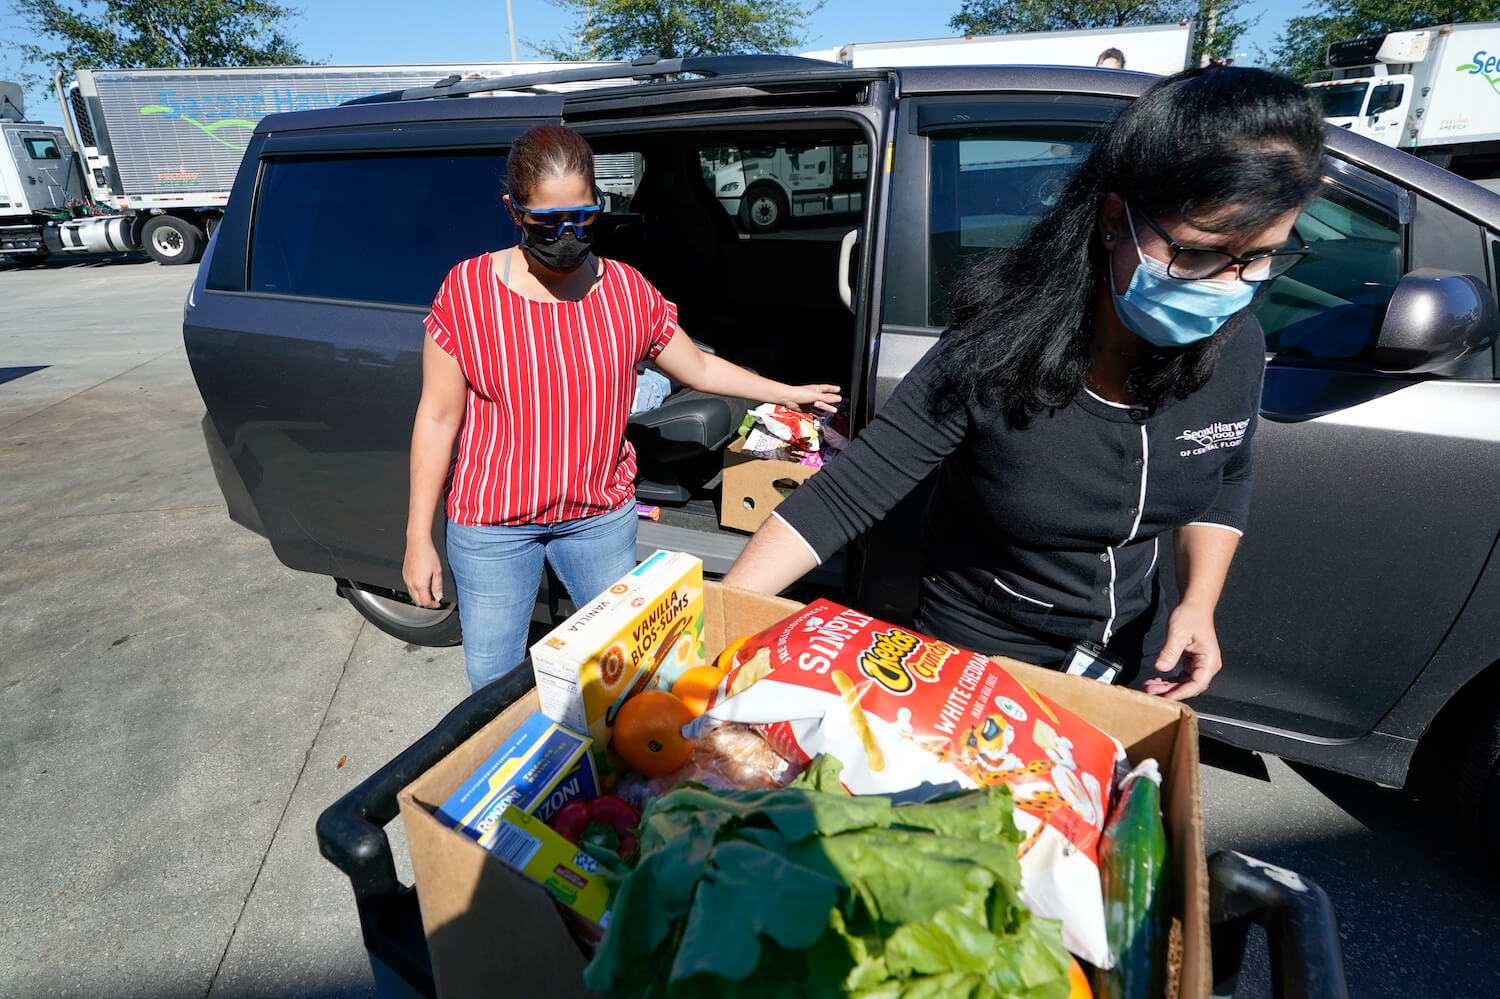 Johnna Nieves, left, opens her van as Idalia Nunez, right, of the Second Harvest Food Bank loads the vehicle with a weeks supply of food in Orlando, Fla., on Tuesday, Nov. 17, 2020. While food banks have become critical during the pandemic, they're just one path for combating hunger. For every meal from a food bank, a federal program called Supplemental Nutrition Assistance Program, or food stamps _ provides nine. December 2020